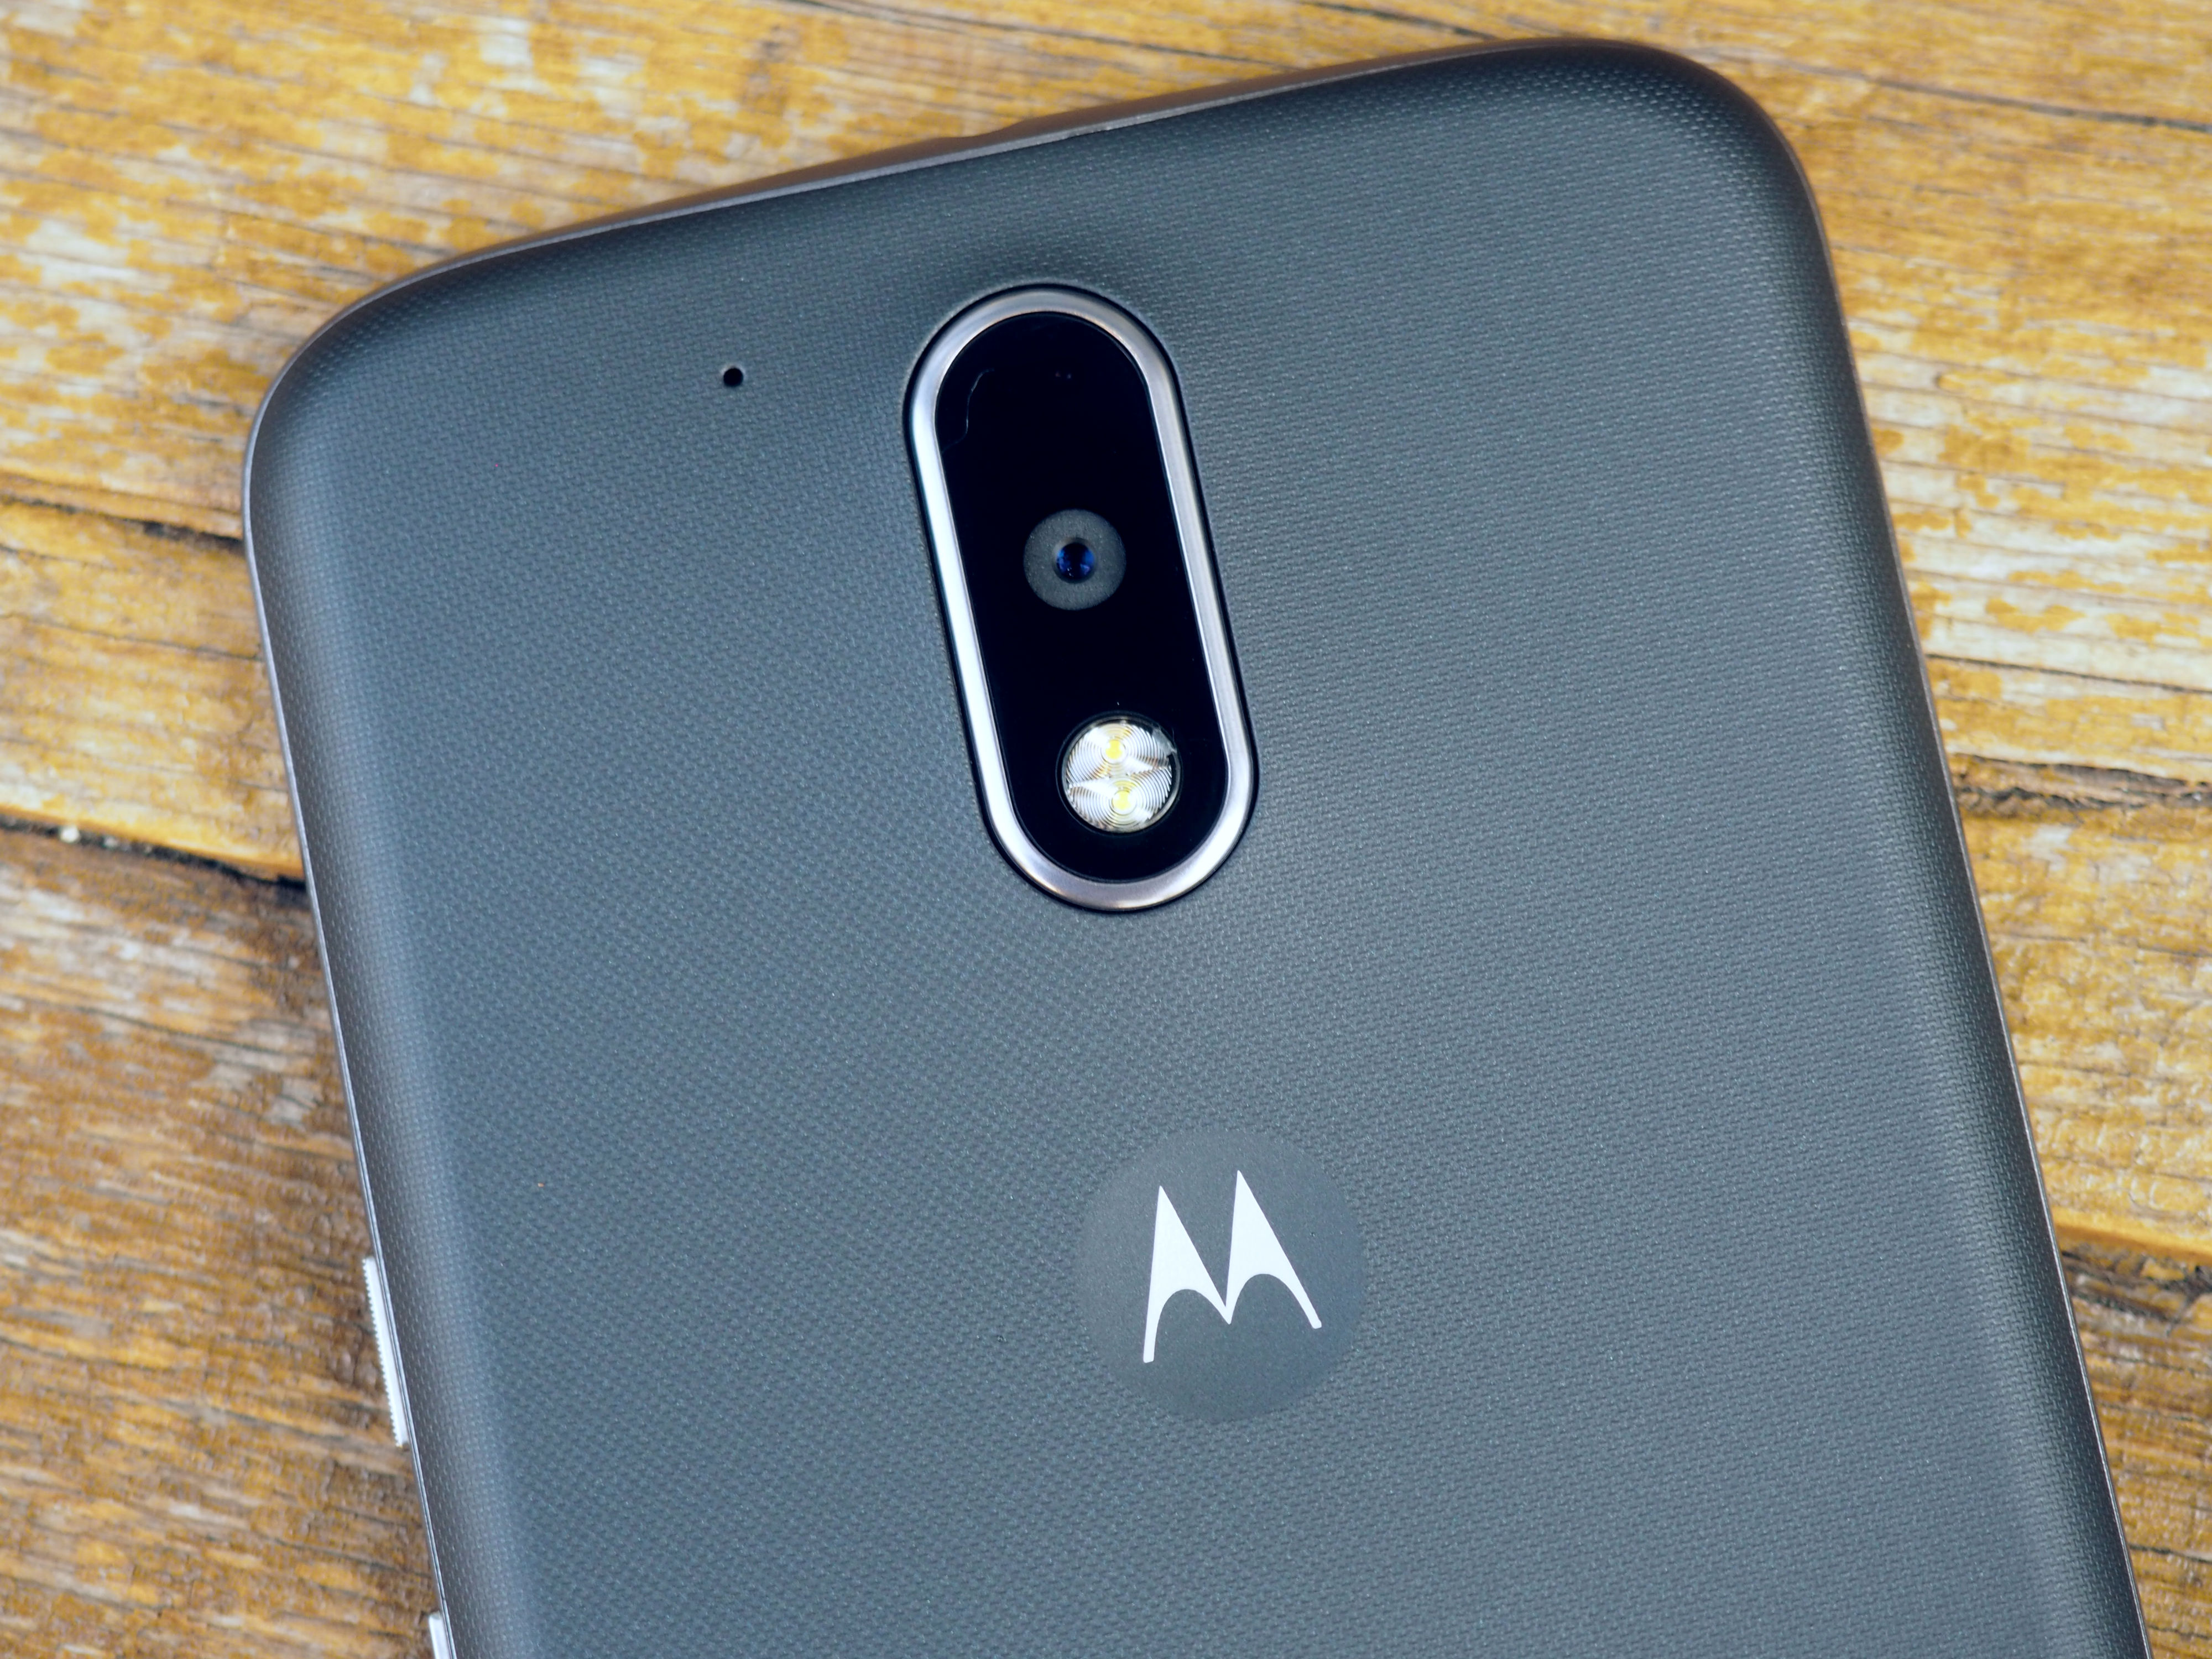 Motorola Moto G4 Play currently going for $99 in US -  news